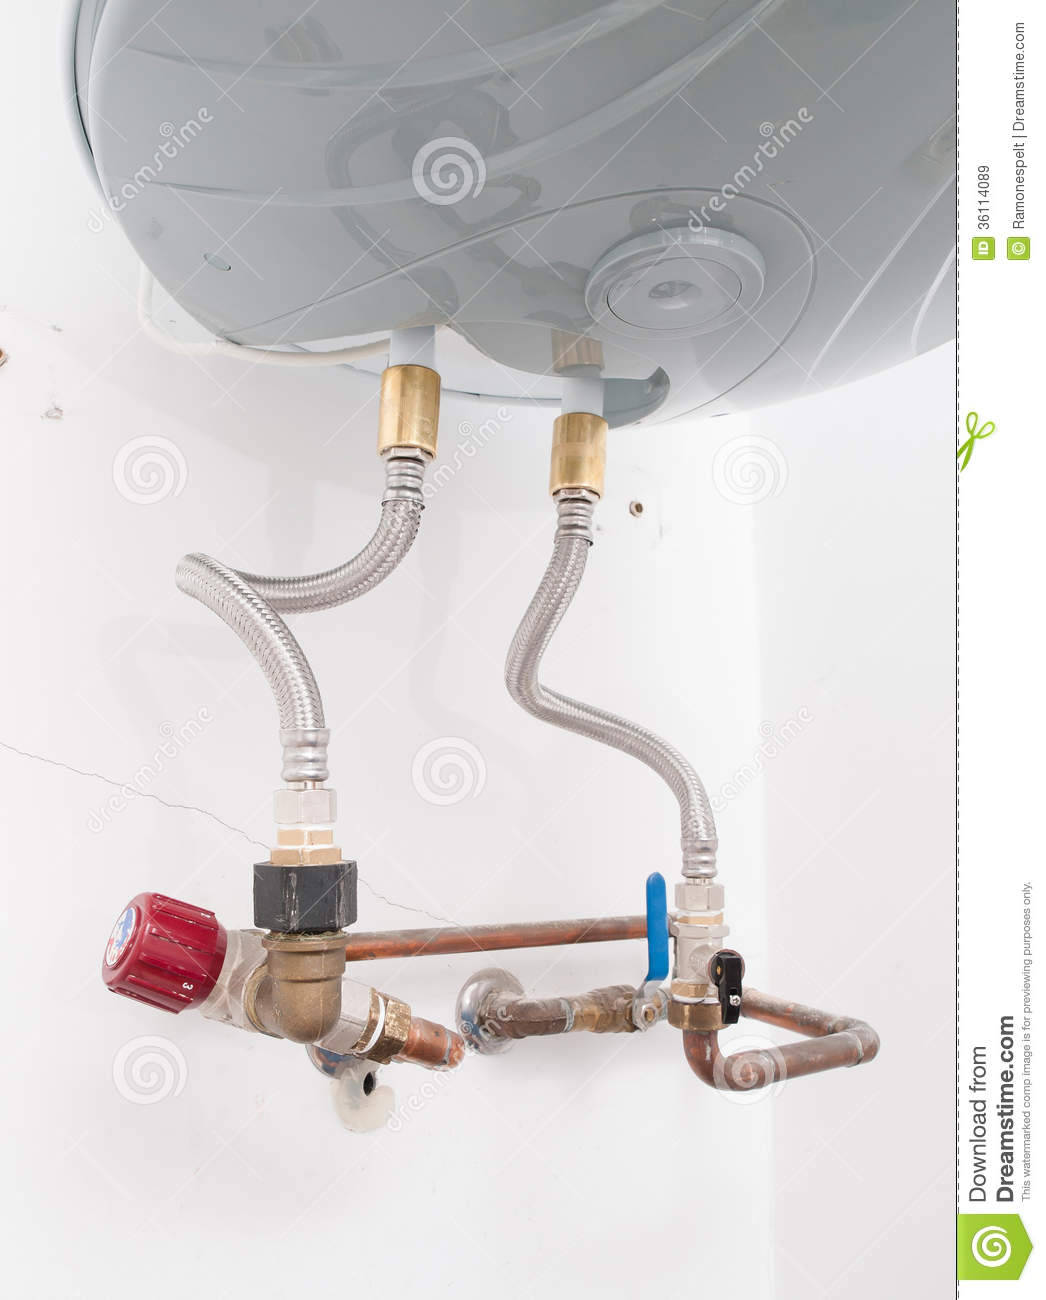 Electric Boiler Inside A House Royalty Free Stock Images   Image